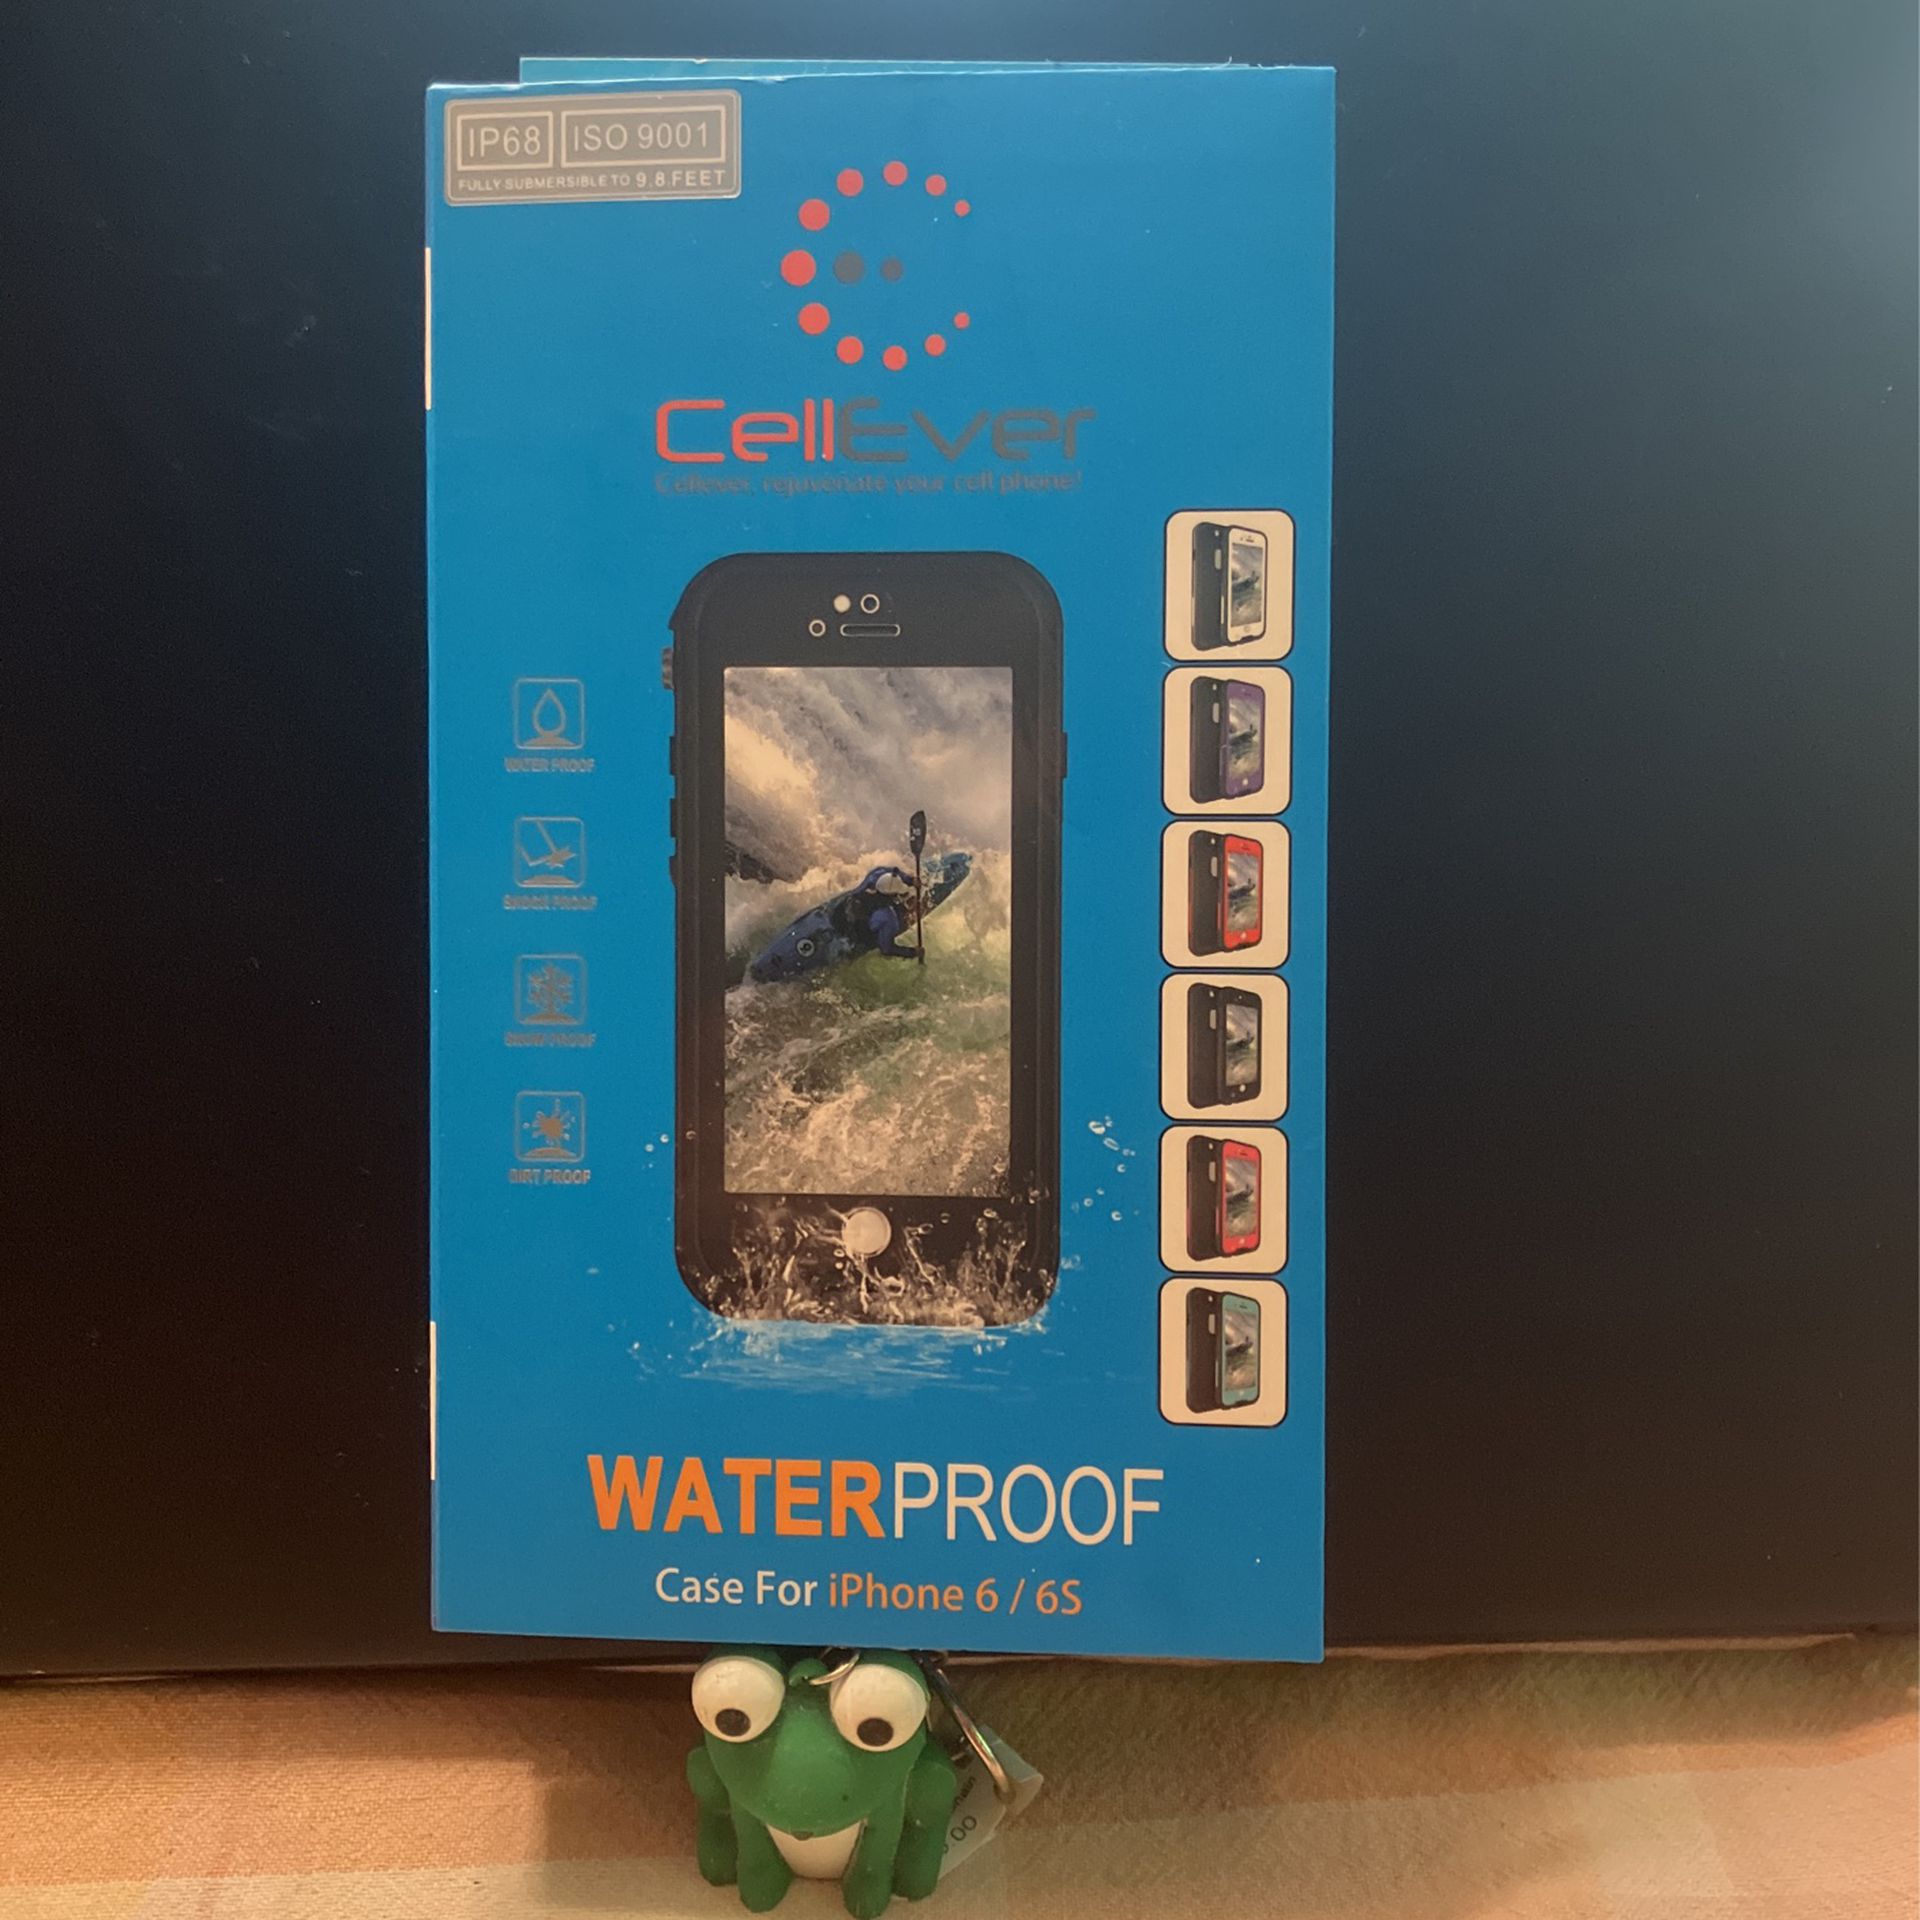 Waterproof case for iPhone 6/6S